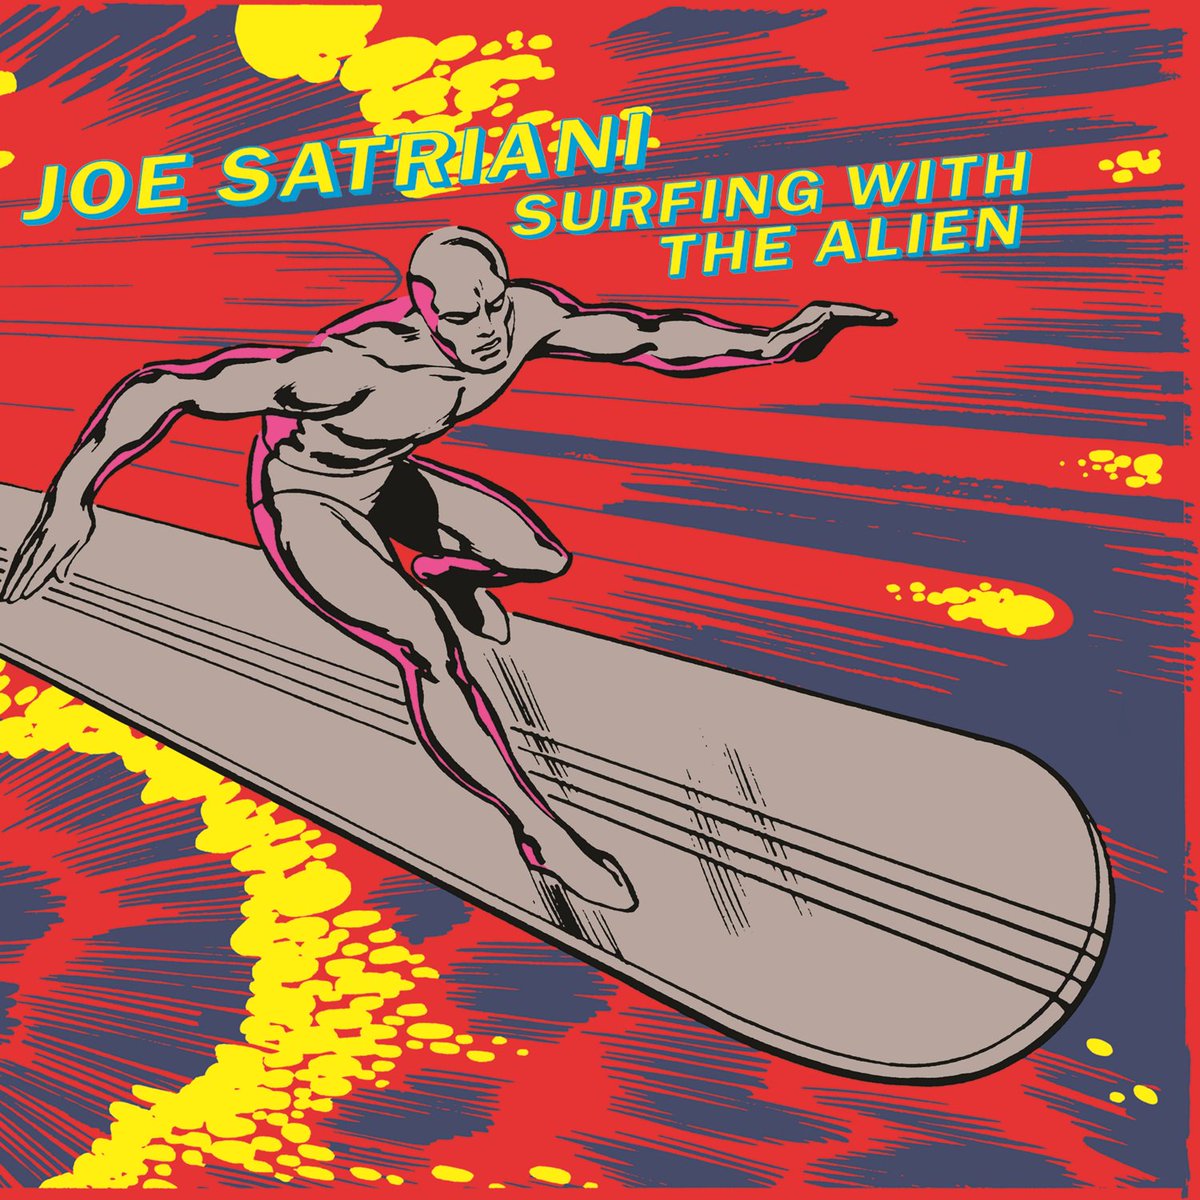 Oct. 15th marked 30th Anniversary of #SurfingWithTheAlien. Let's hear your favorite songs, shows and stories- tag #SWTA30